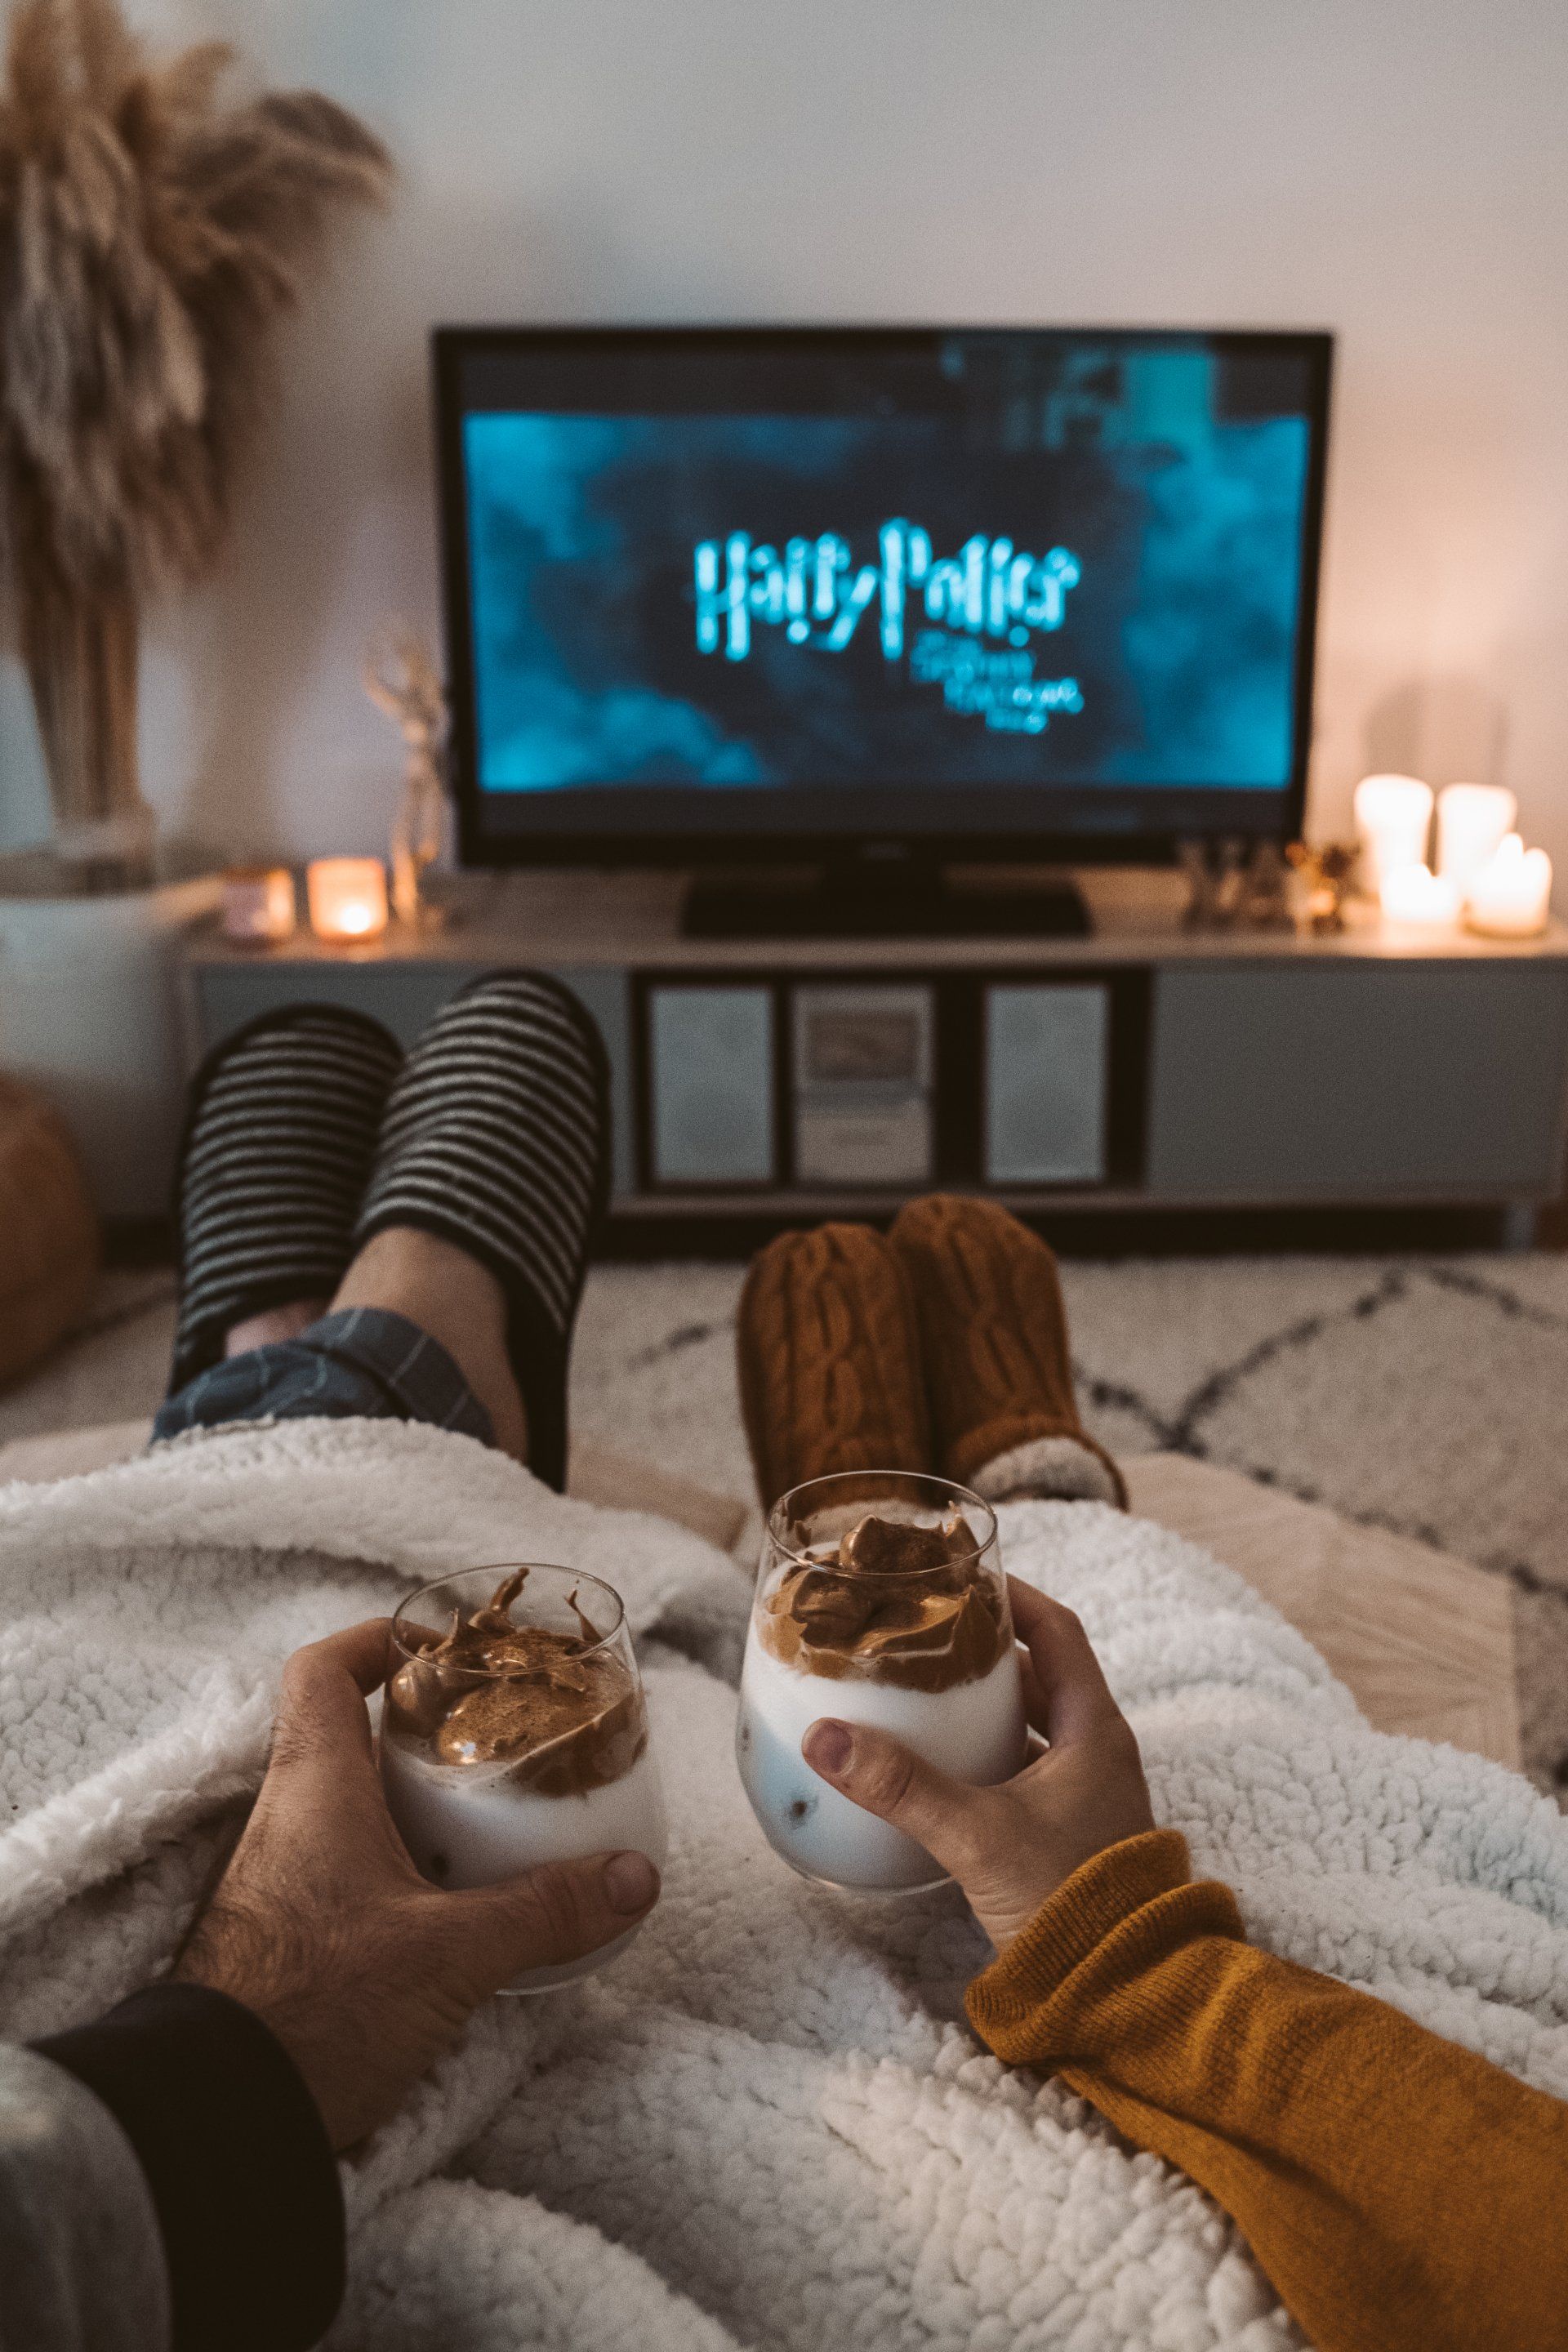 a couple is sitting on a couch watching a harry potter movie .